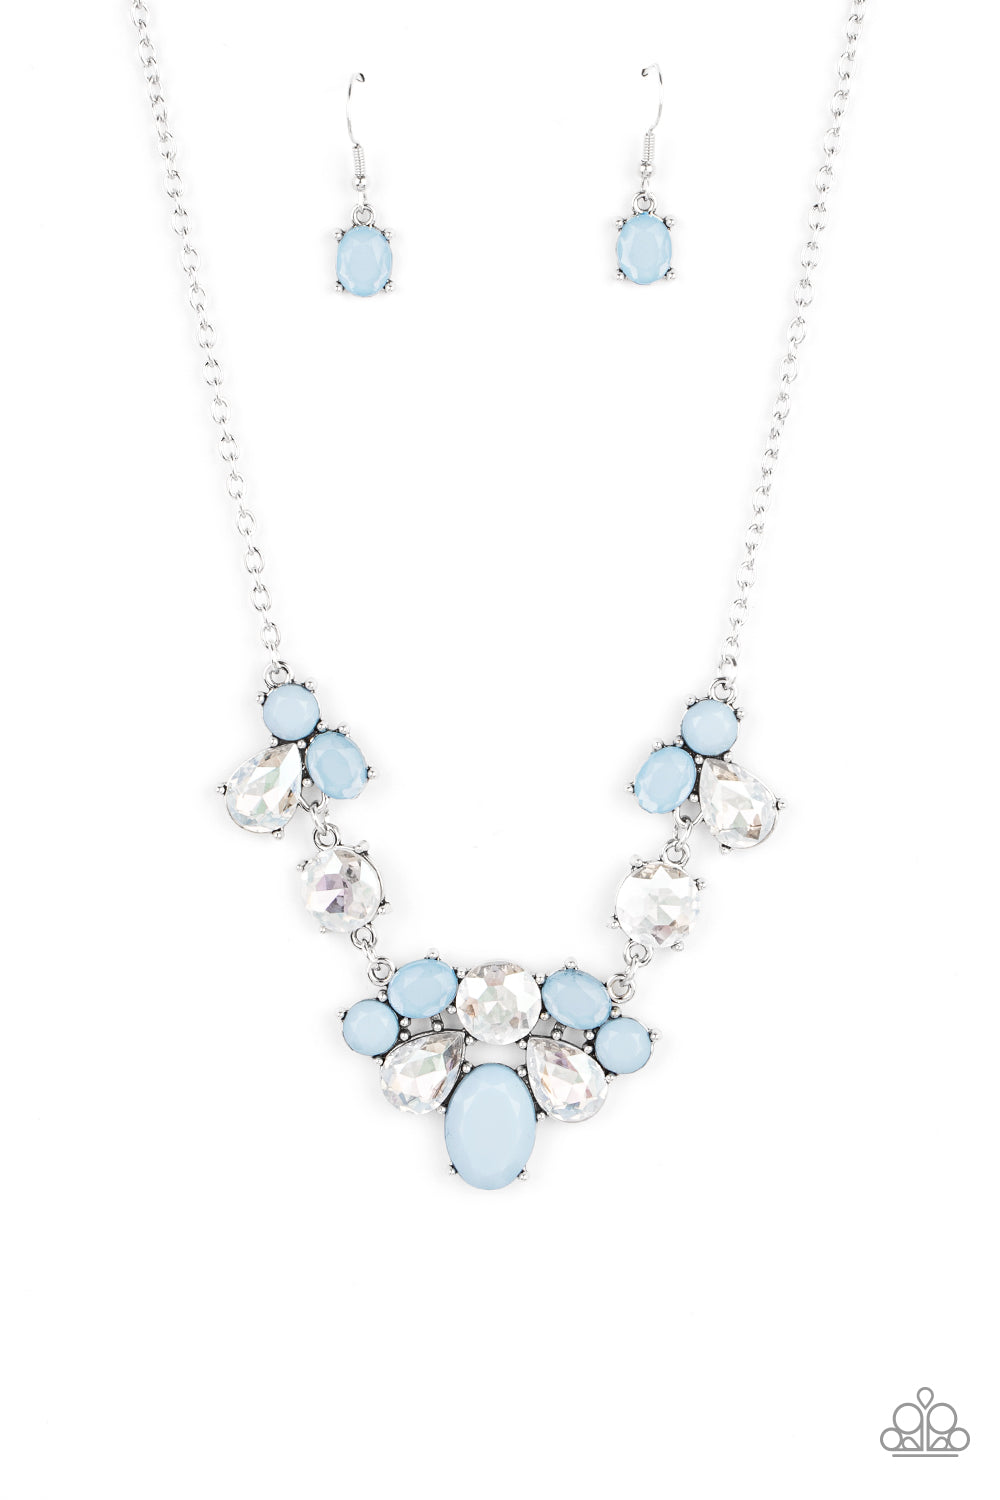 ​Ethereal Romance - Blue Beads - Rhinestones - Silver Necklace - Paparazzi Accessories - 
Varying in opacity and shape, mismatched Cerulean beads attach to oversized white rhinestones, creating bubbly frames that delicately link into an ethereal display below the collar. Features an adjustable clasp closure.
